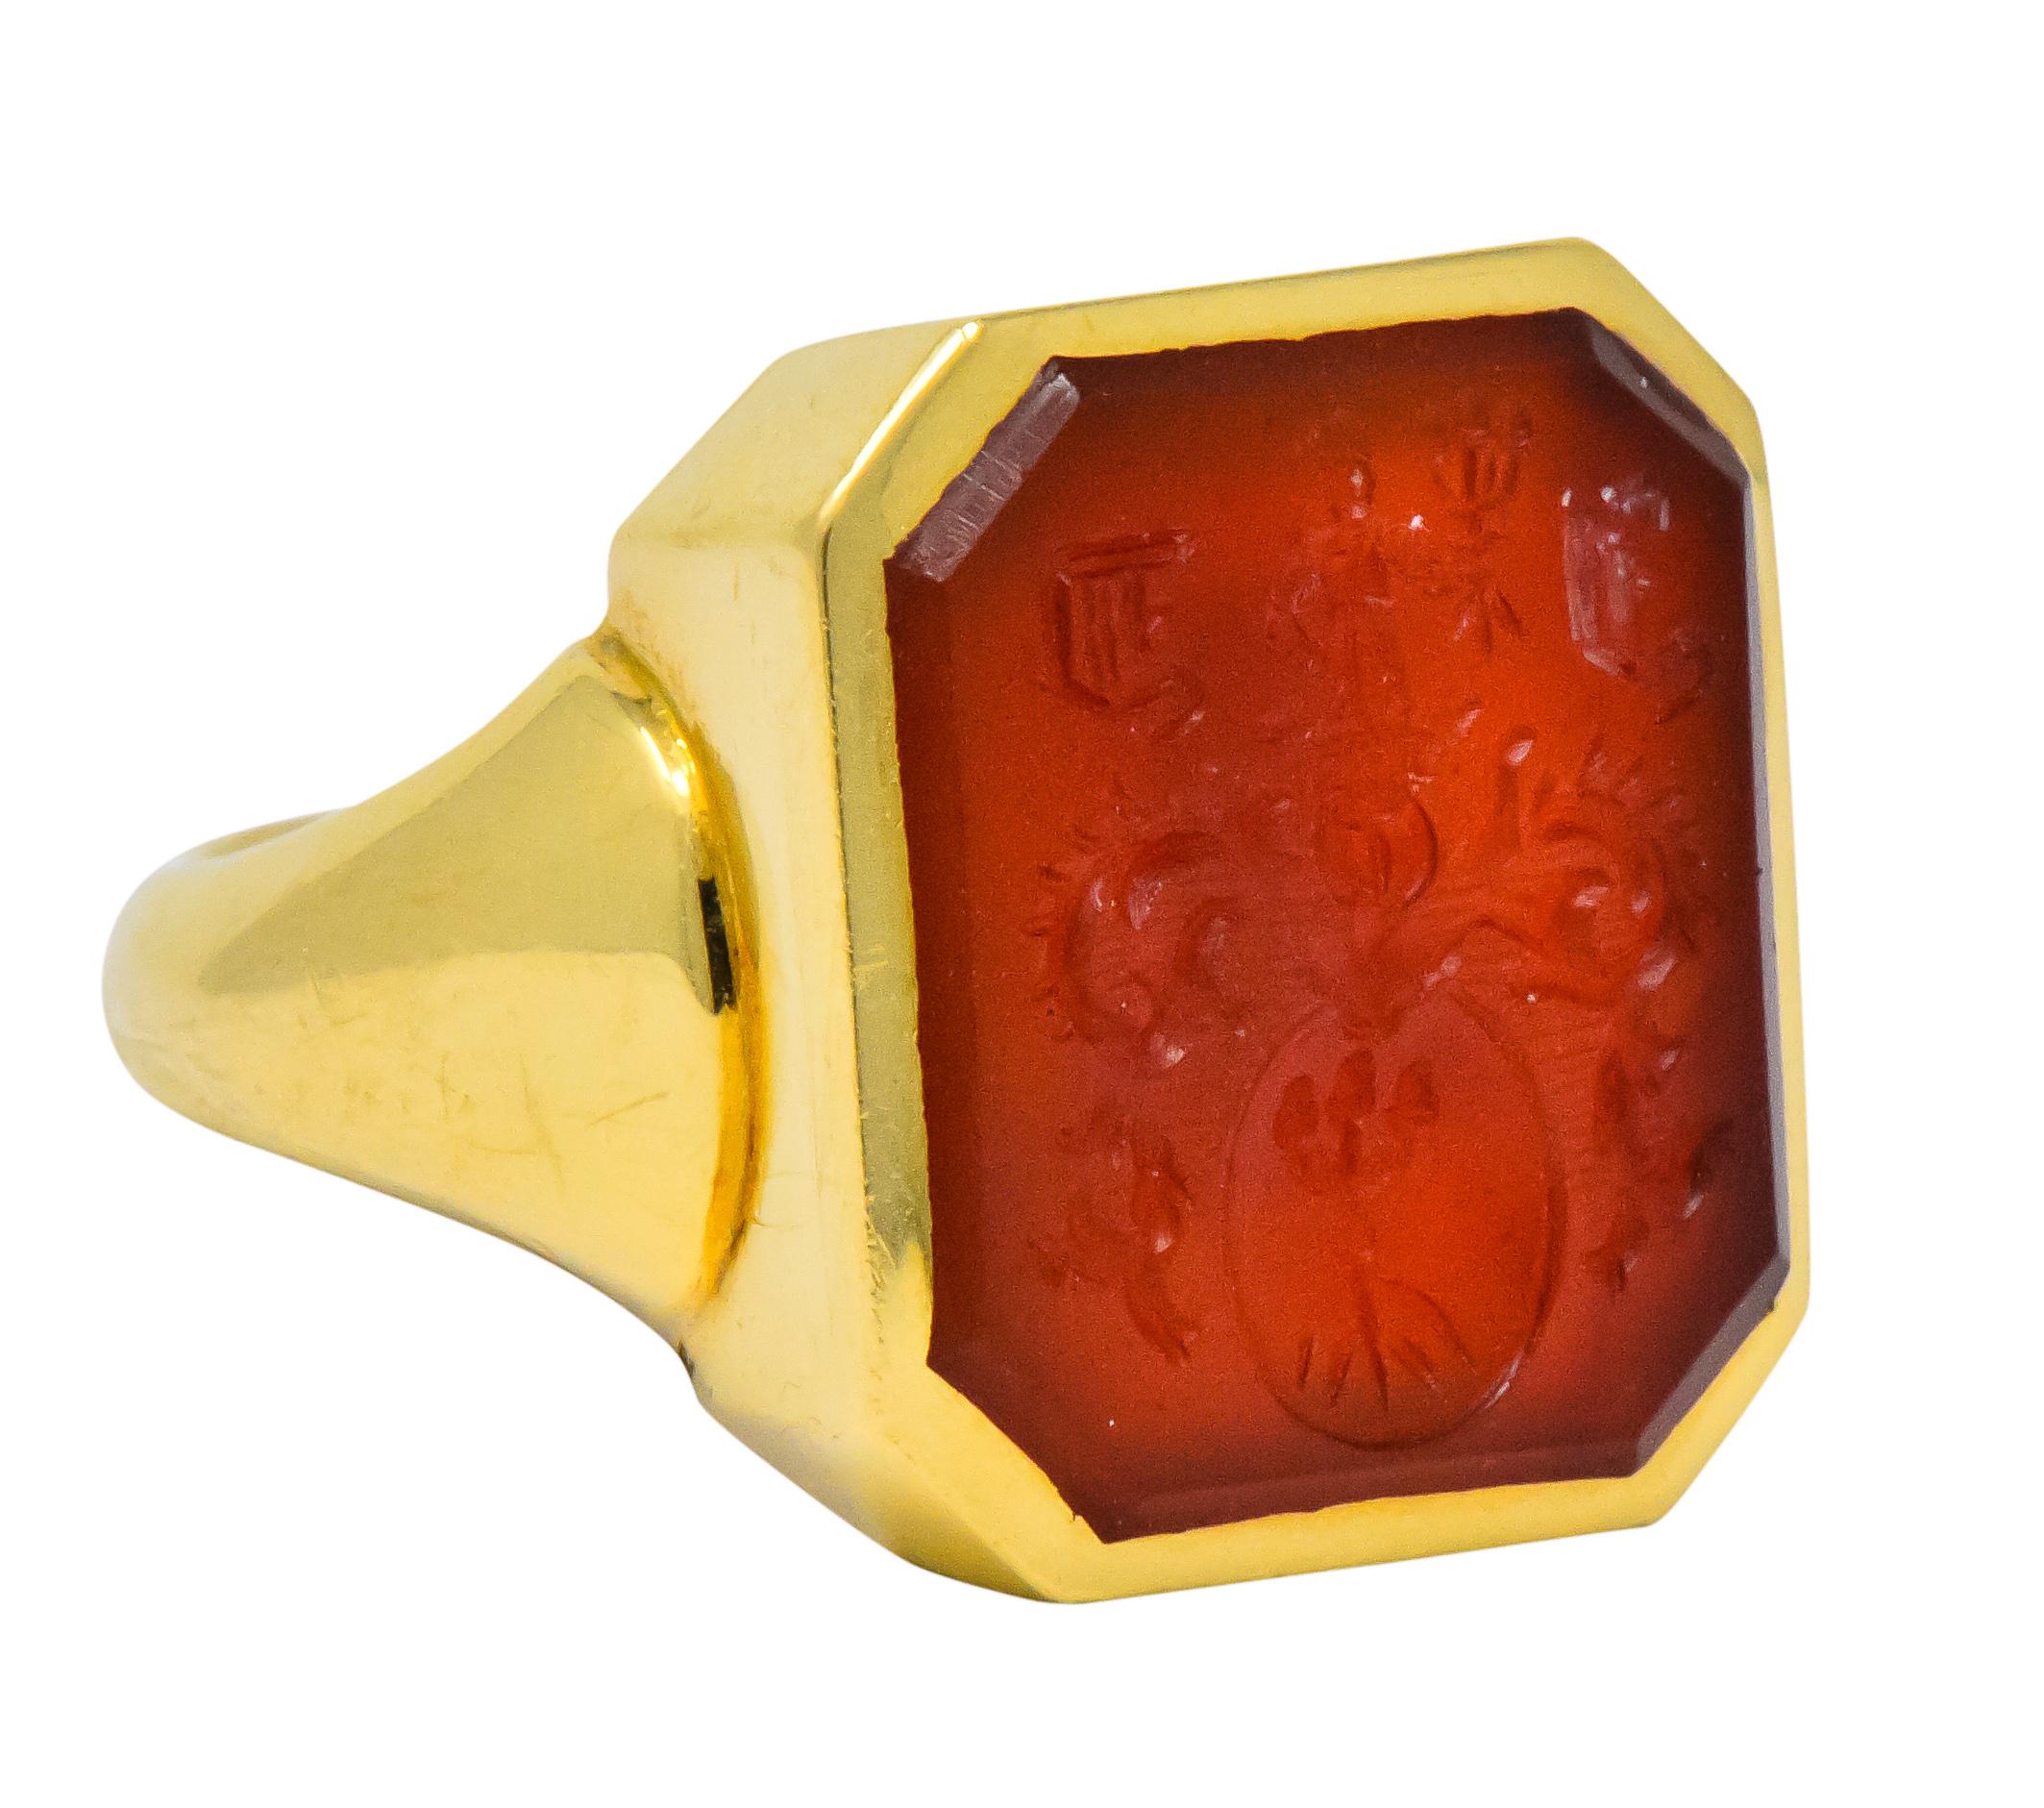 Centering a cut-corner intaglio carved carnelian, measuring approximately 17.0 x 15.0 mm, bright brownish orange

Deeply and highly detailed carving, depicting acorns and a man in native dress with old English lettering

Signed CG& S for Charles